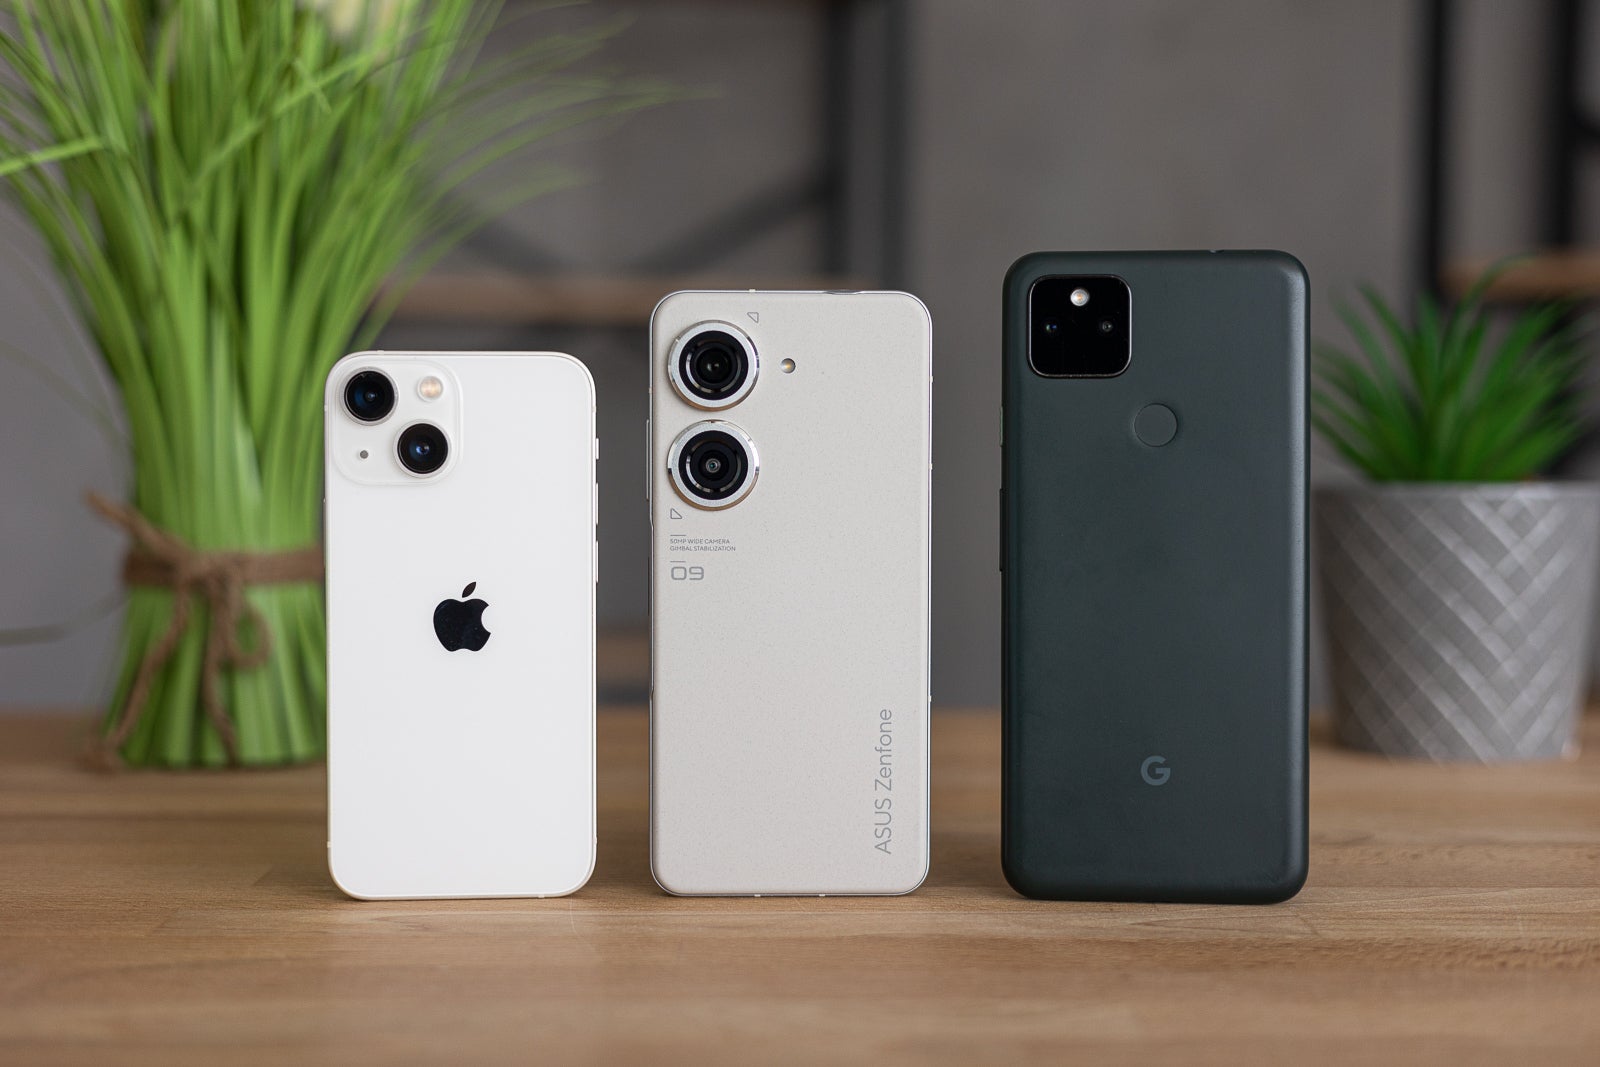 From left to right - iPhone 13 mini, ZenFone 9, Pixel 5a (Image credit PhoneArena) - In search of the perfect compact phone: Asus ZenFone 9